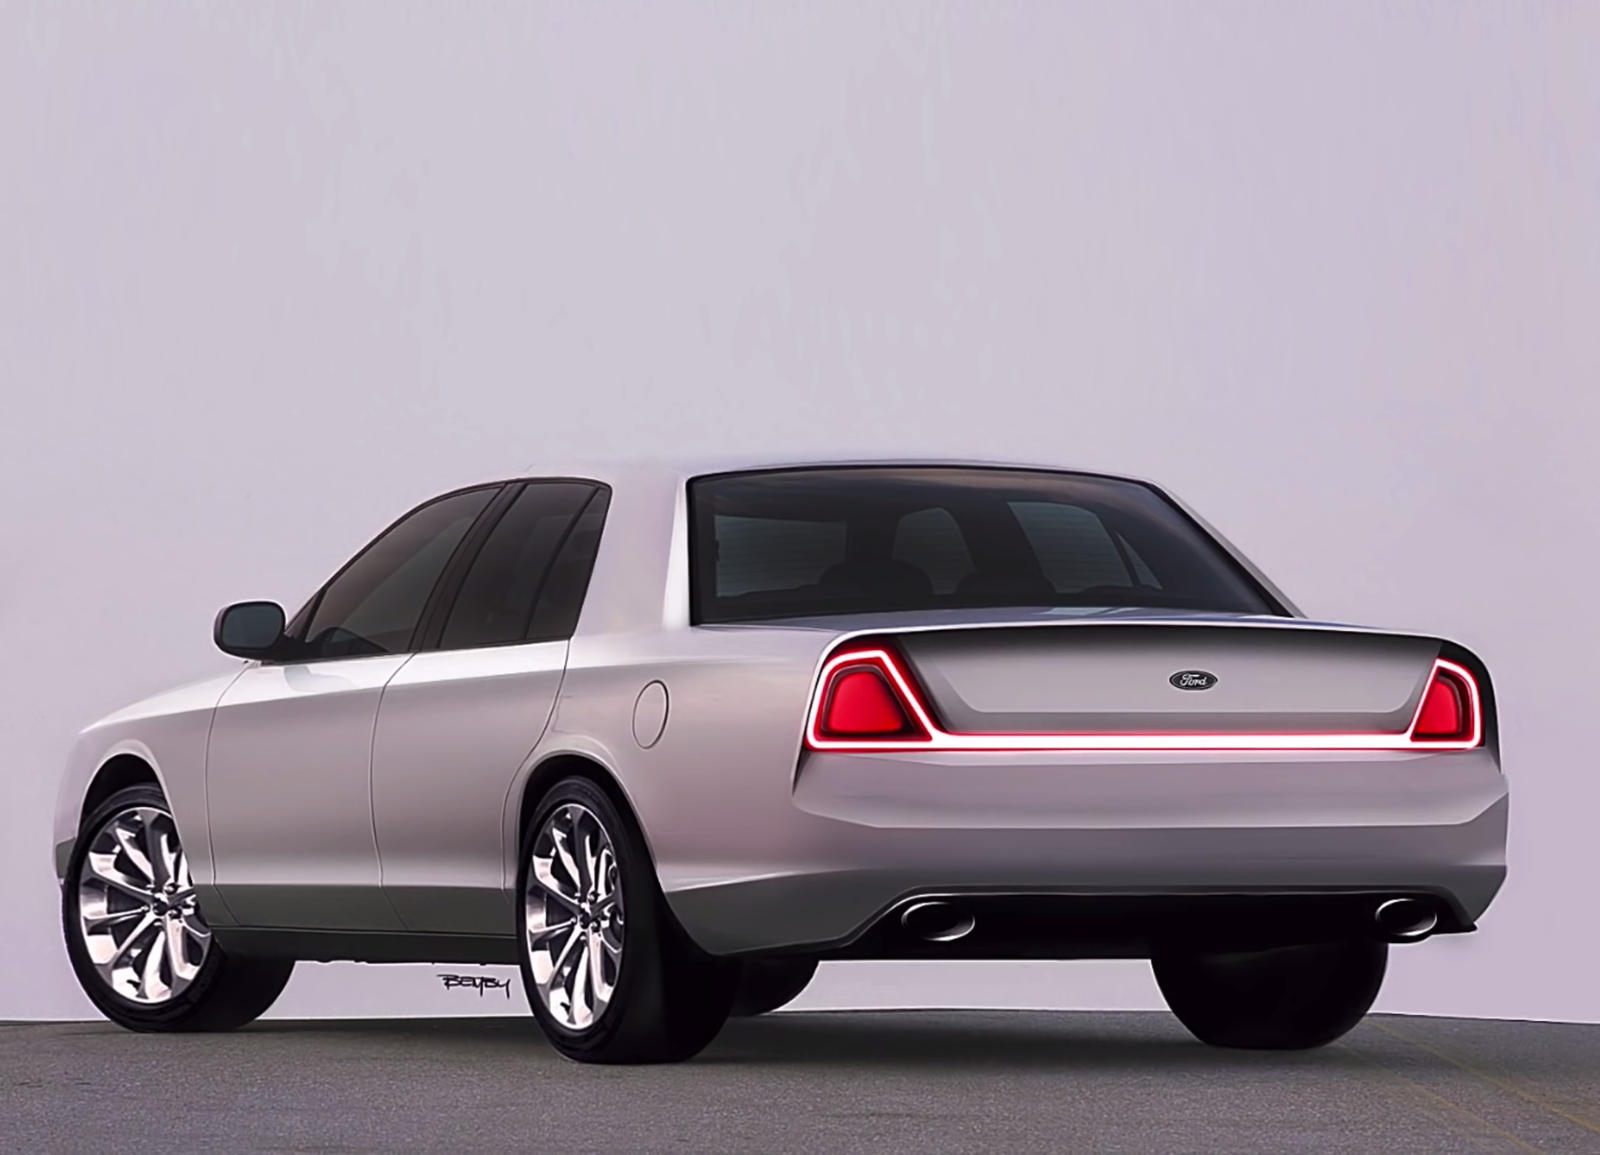 Should Ford Build A New Crown Victoria That Looks Like This? CarBuzz